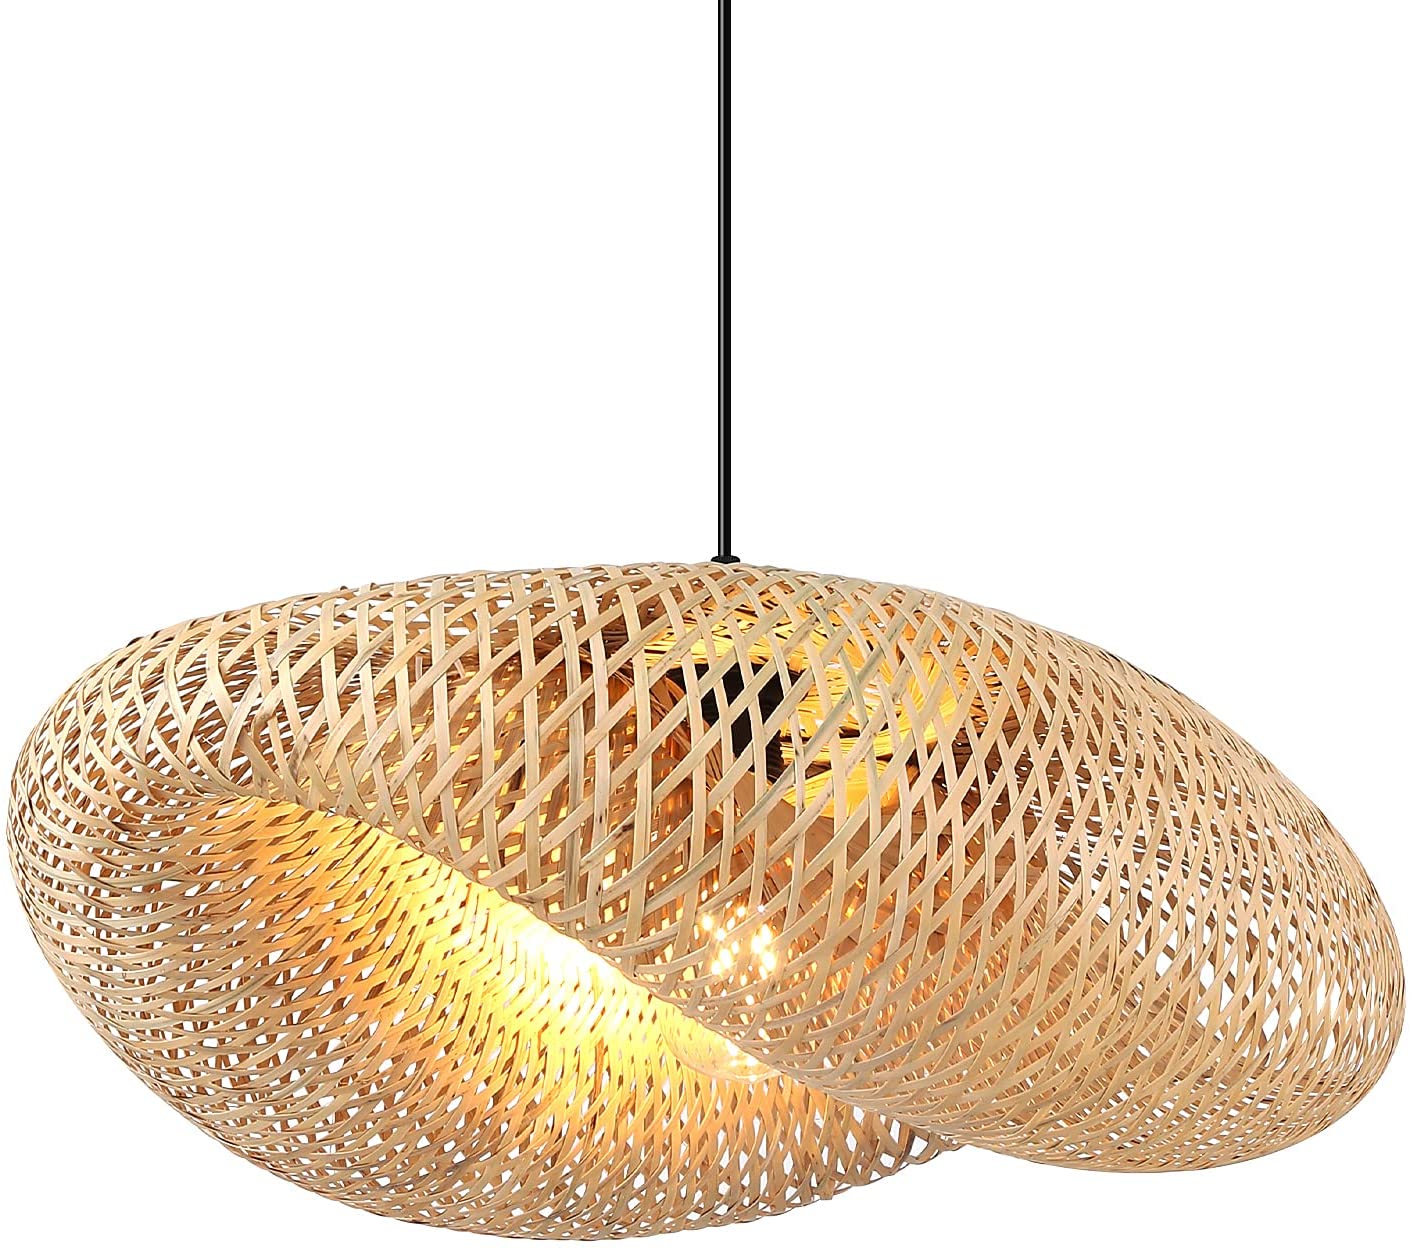 BarcelonaLED Handmade Wicker Ceiling Hanging Lamp with Bamboo Rattan Natural Wood Creative Vintage Asian Decorative Style for Tea Room Dining Room Bar Kitchen E27 Cap